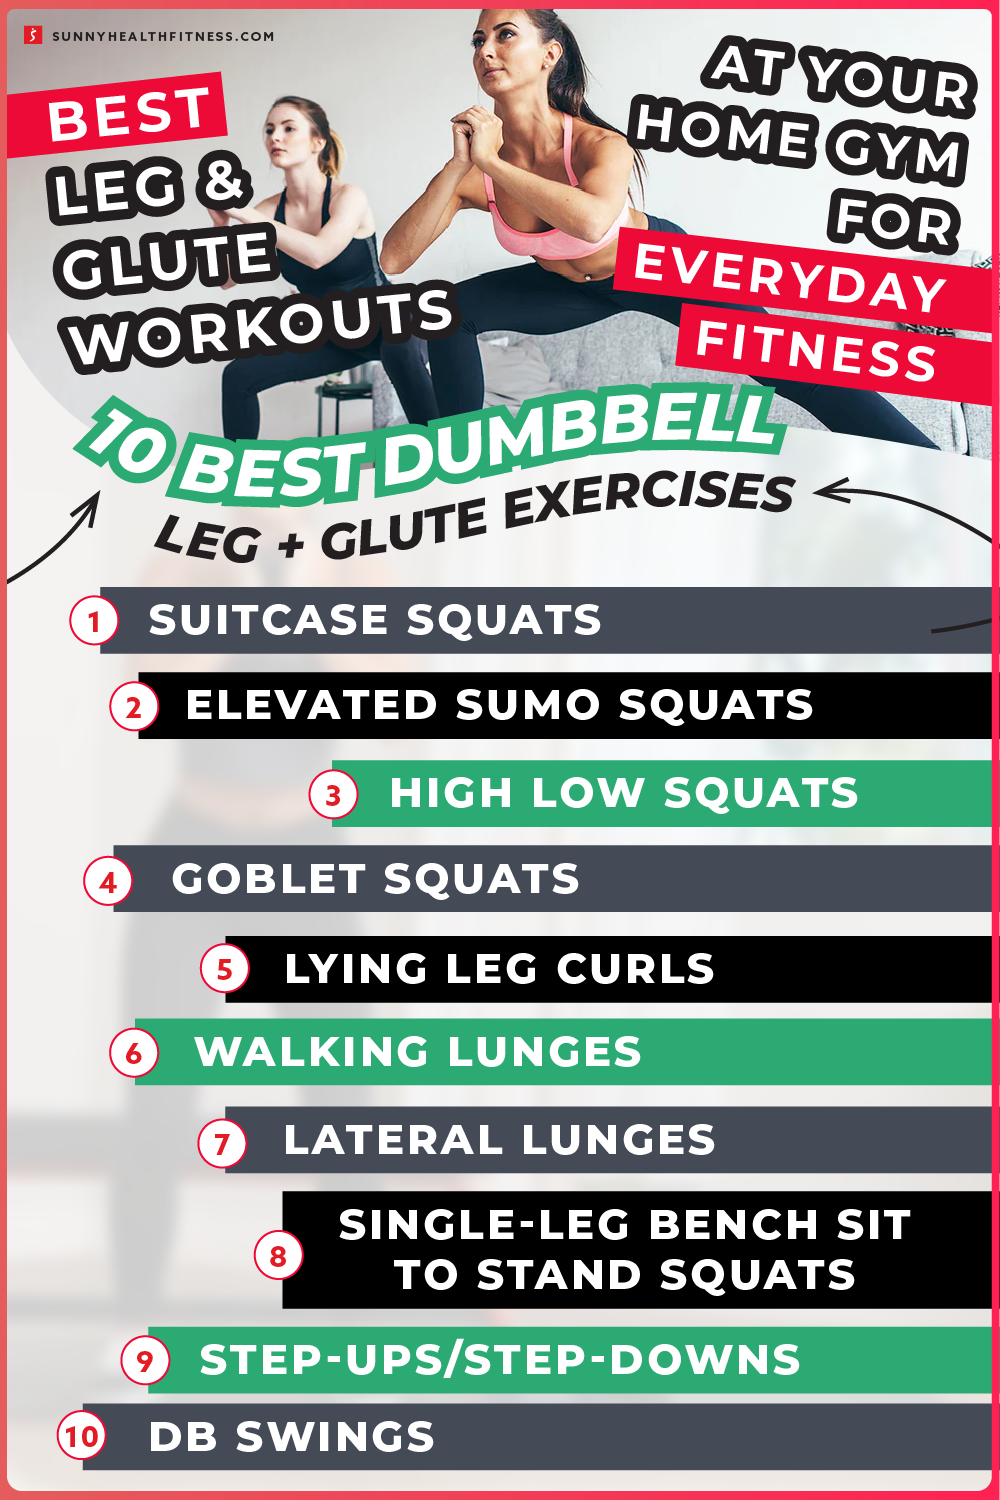 Best Leg & Glute Workouts at Your Home Gym for Everyday Fitness - Best Dumbbell Exercies